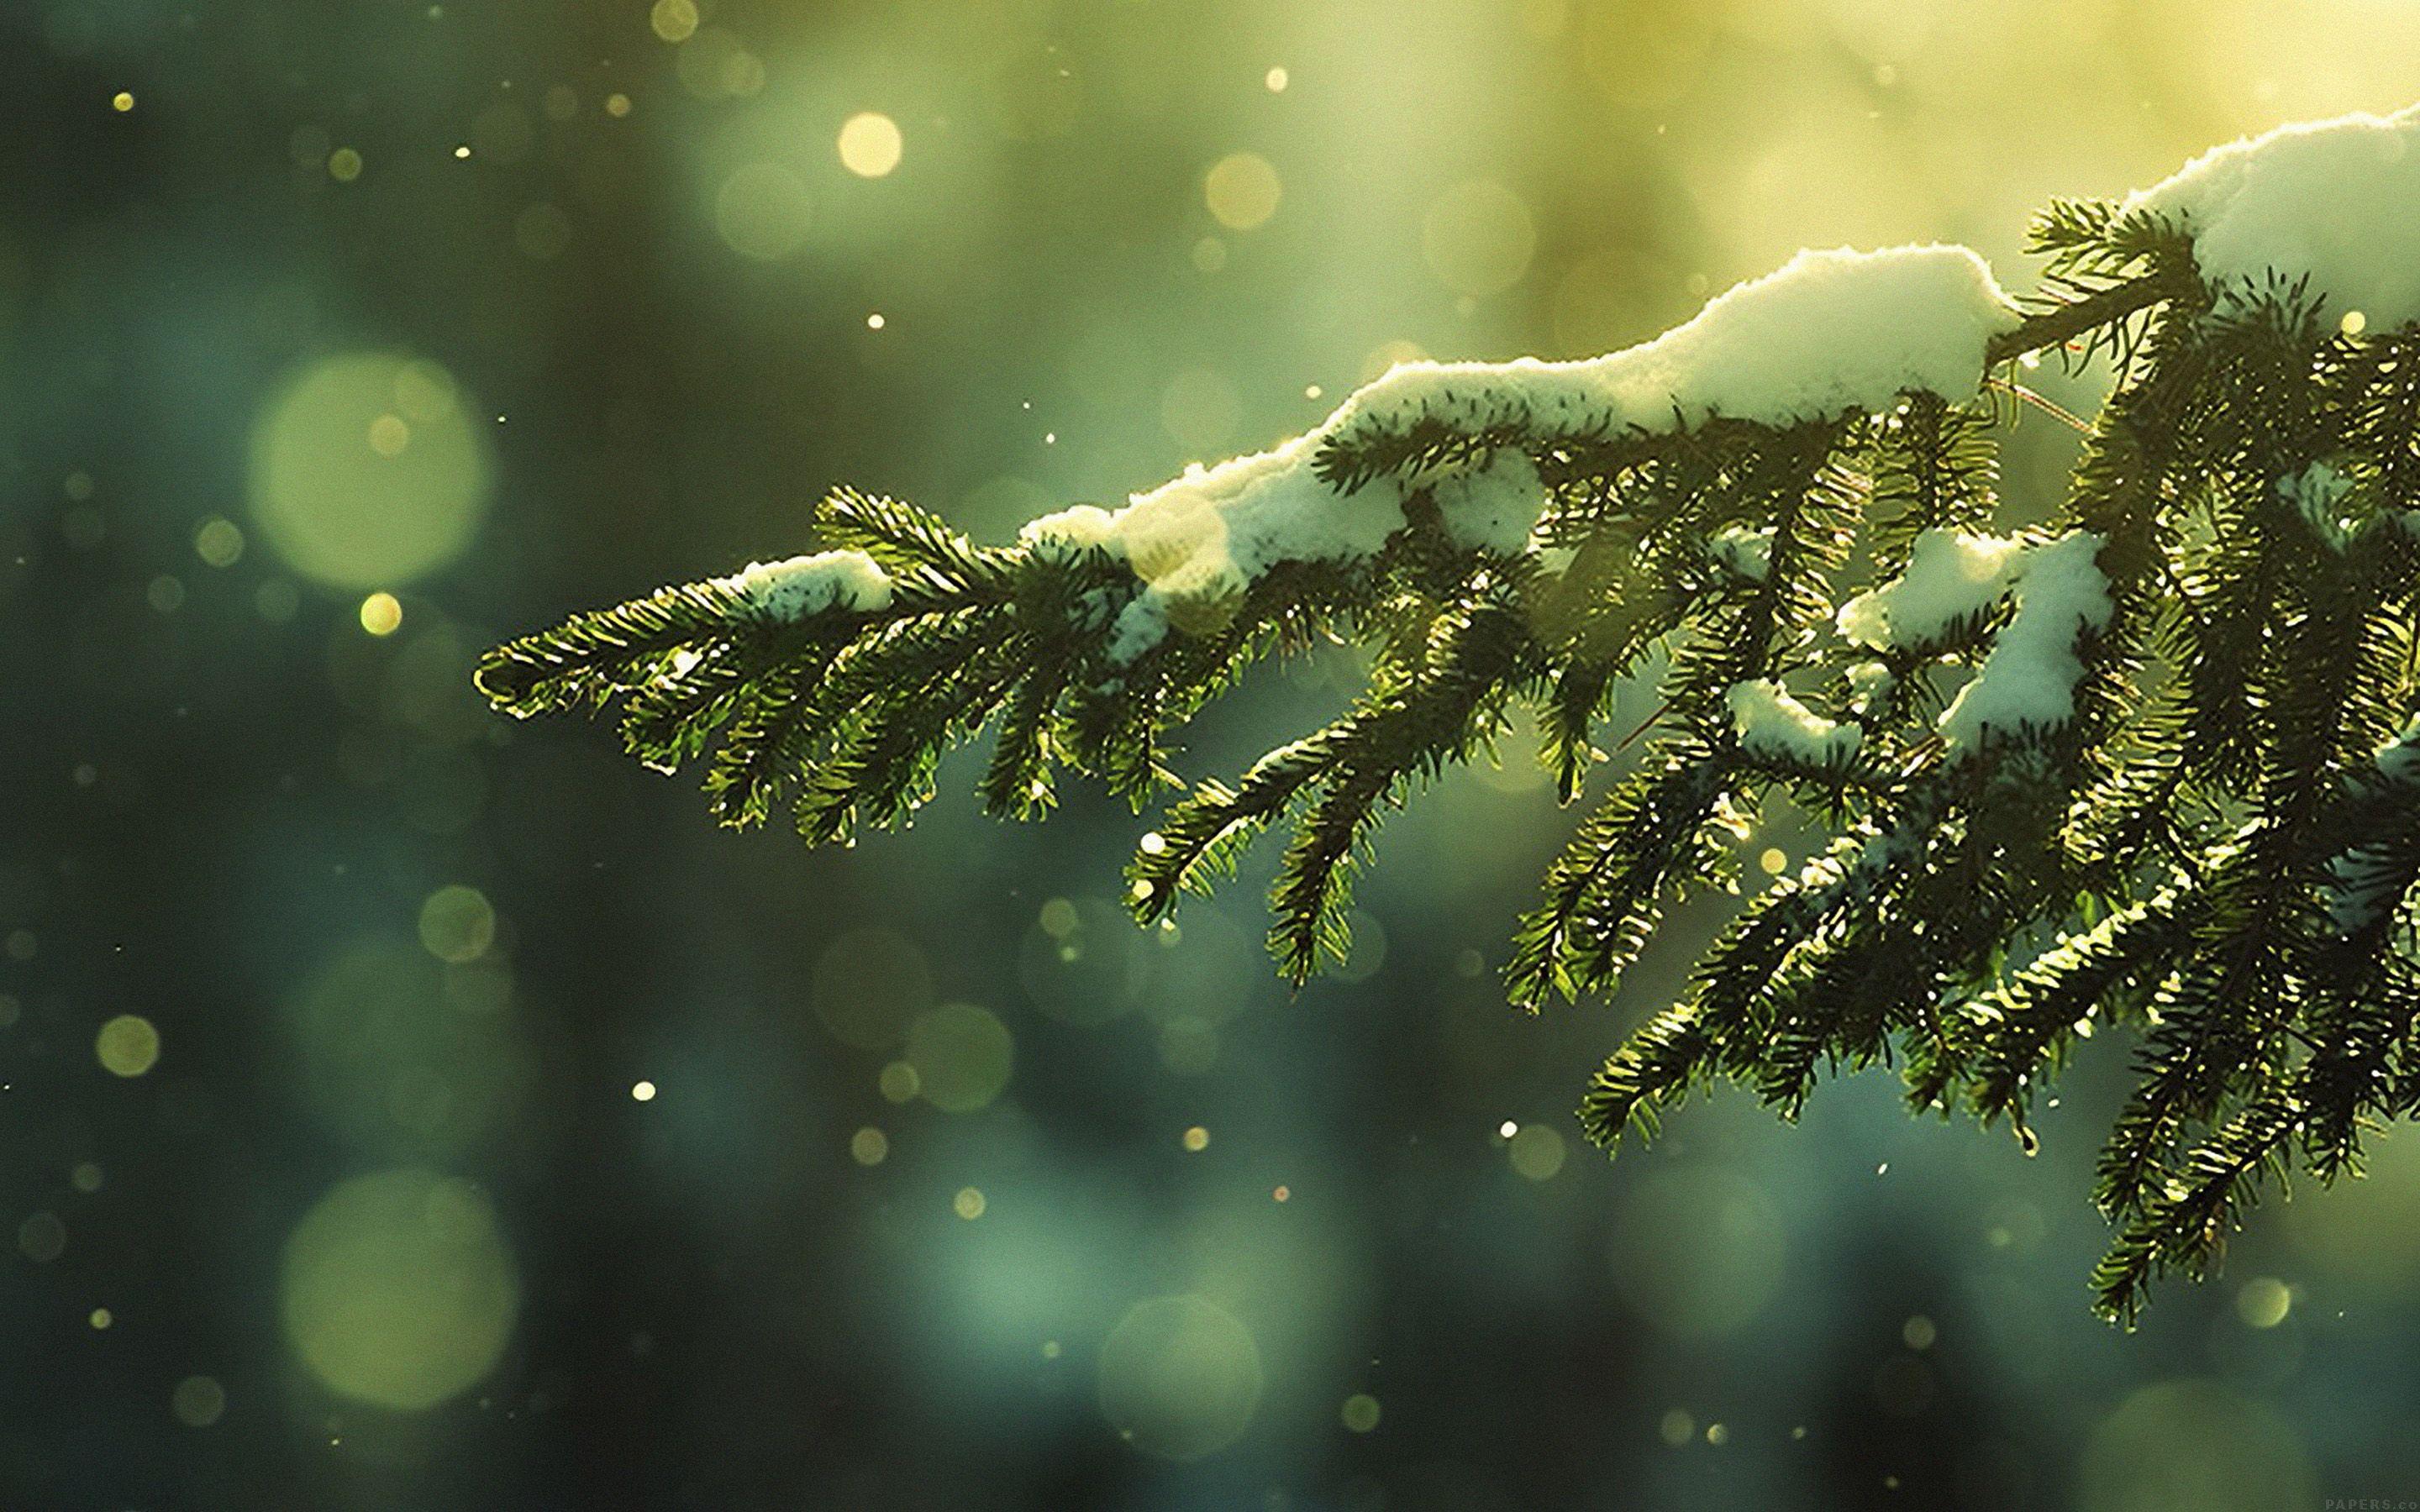 Winter Wallpapers with Snowing Tree for Desktop Backgrounds.